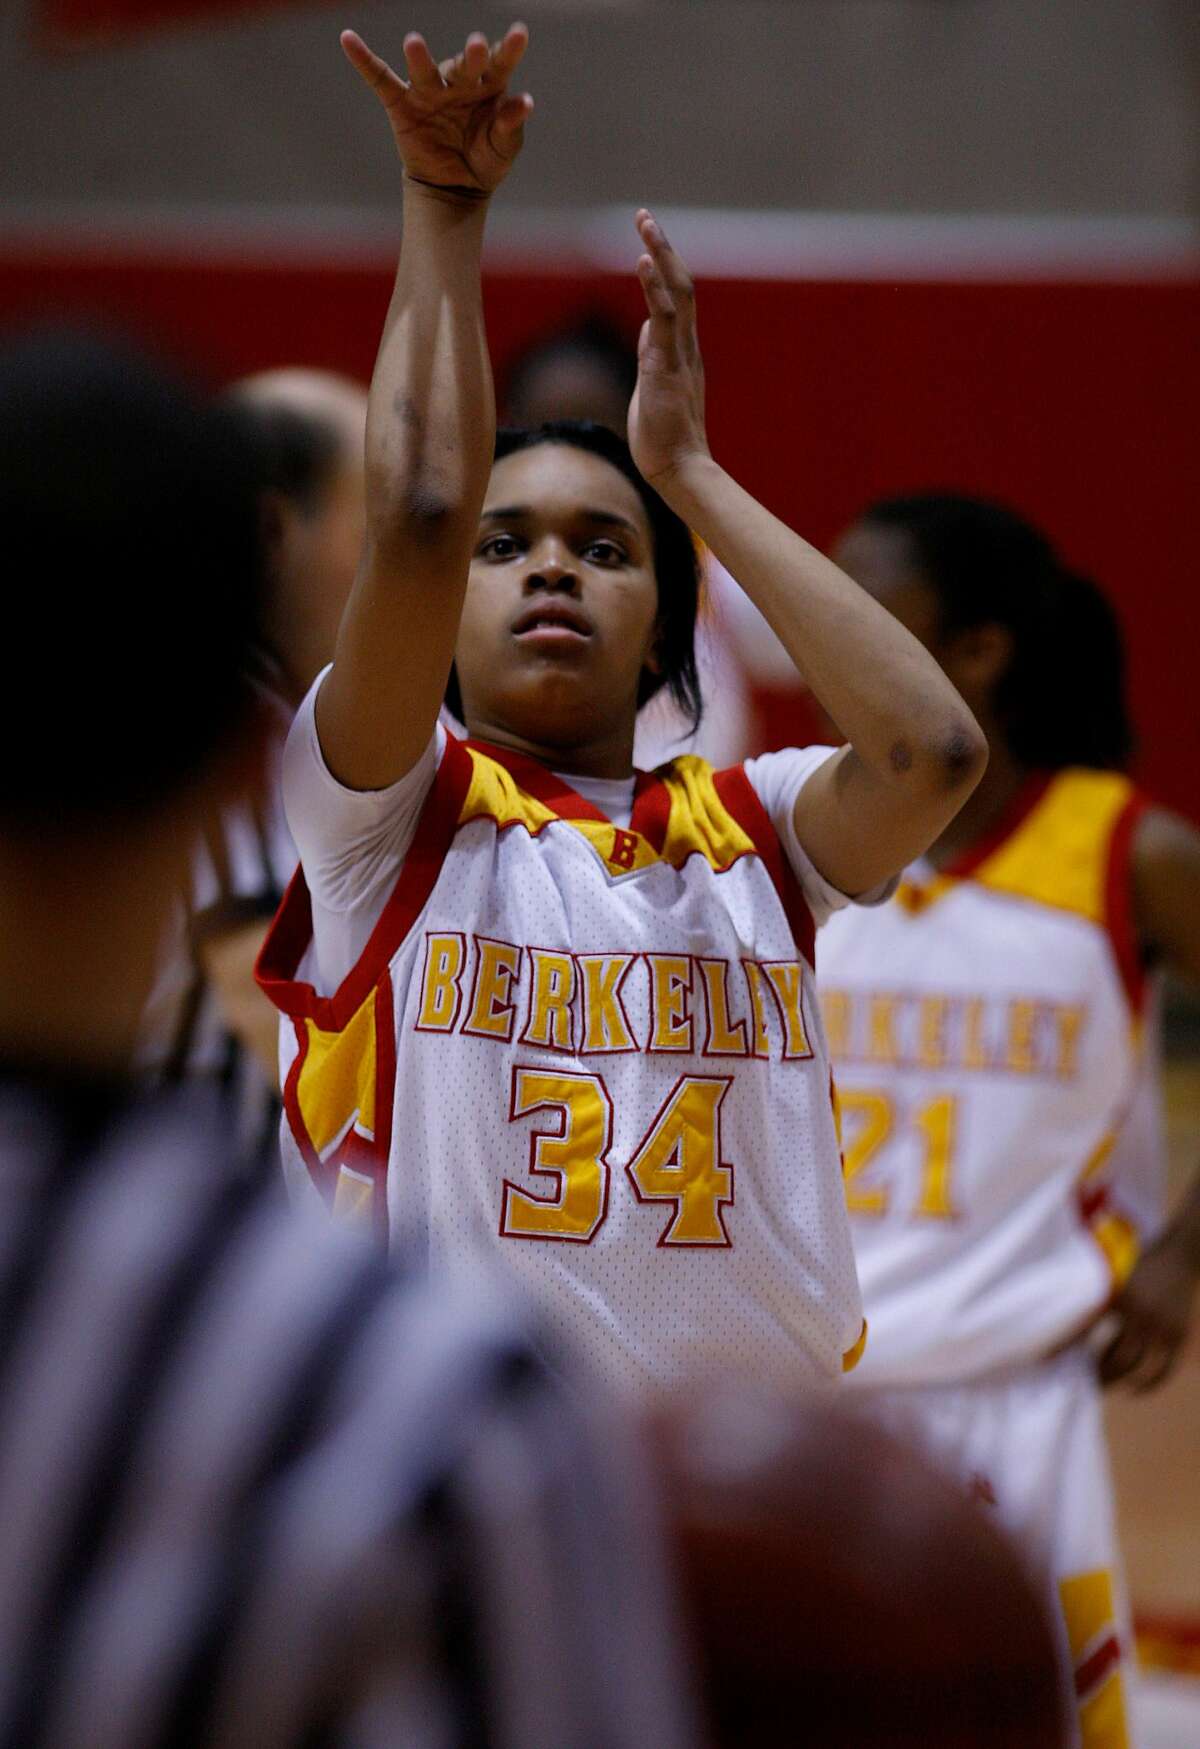 Berkeley's high school basketball star, Brittany Boyd practicing her free throws before taking her shots as Berkeley takes on American in girls high school basketball at Berkeley, Calif., on Friday Feb. 27, 2009.